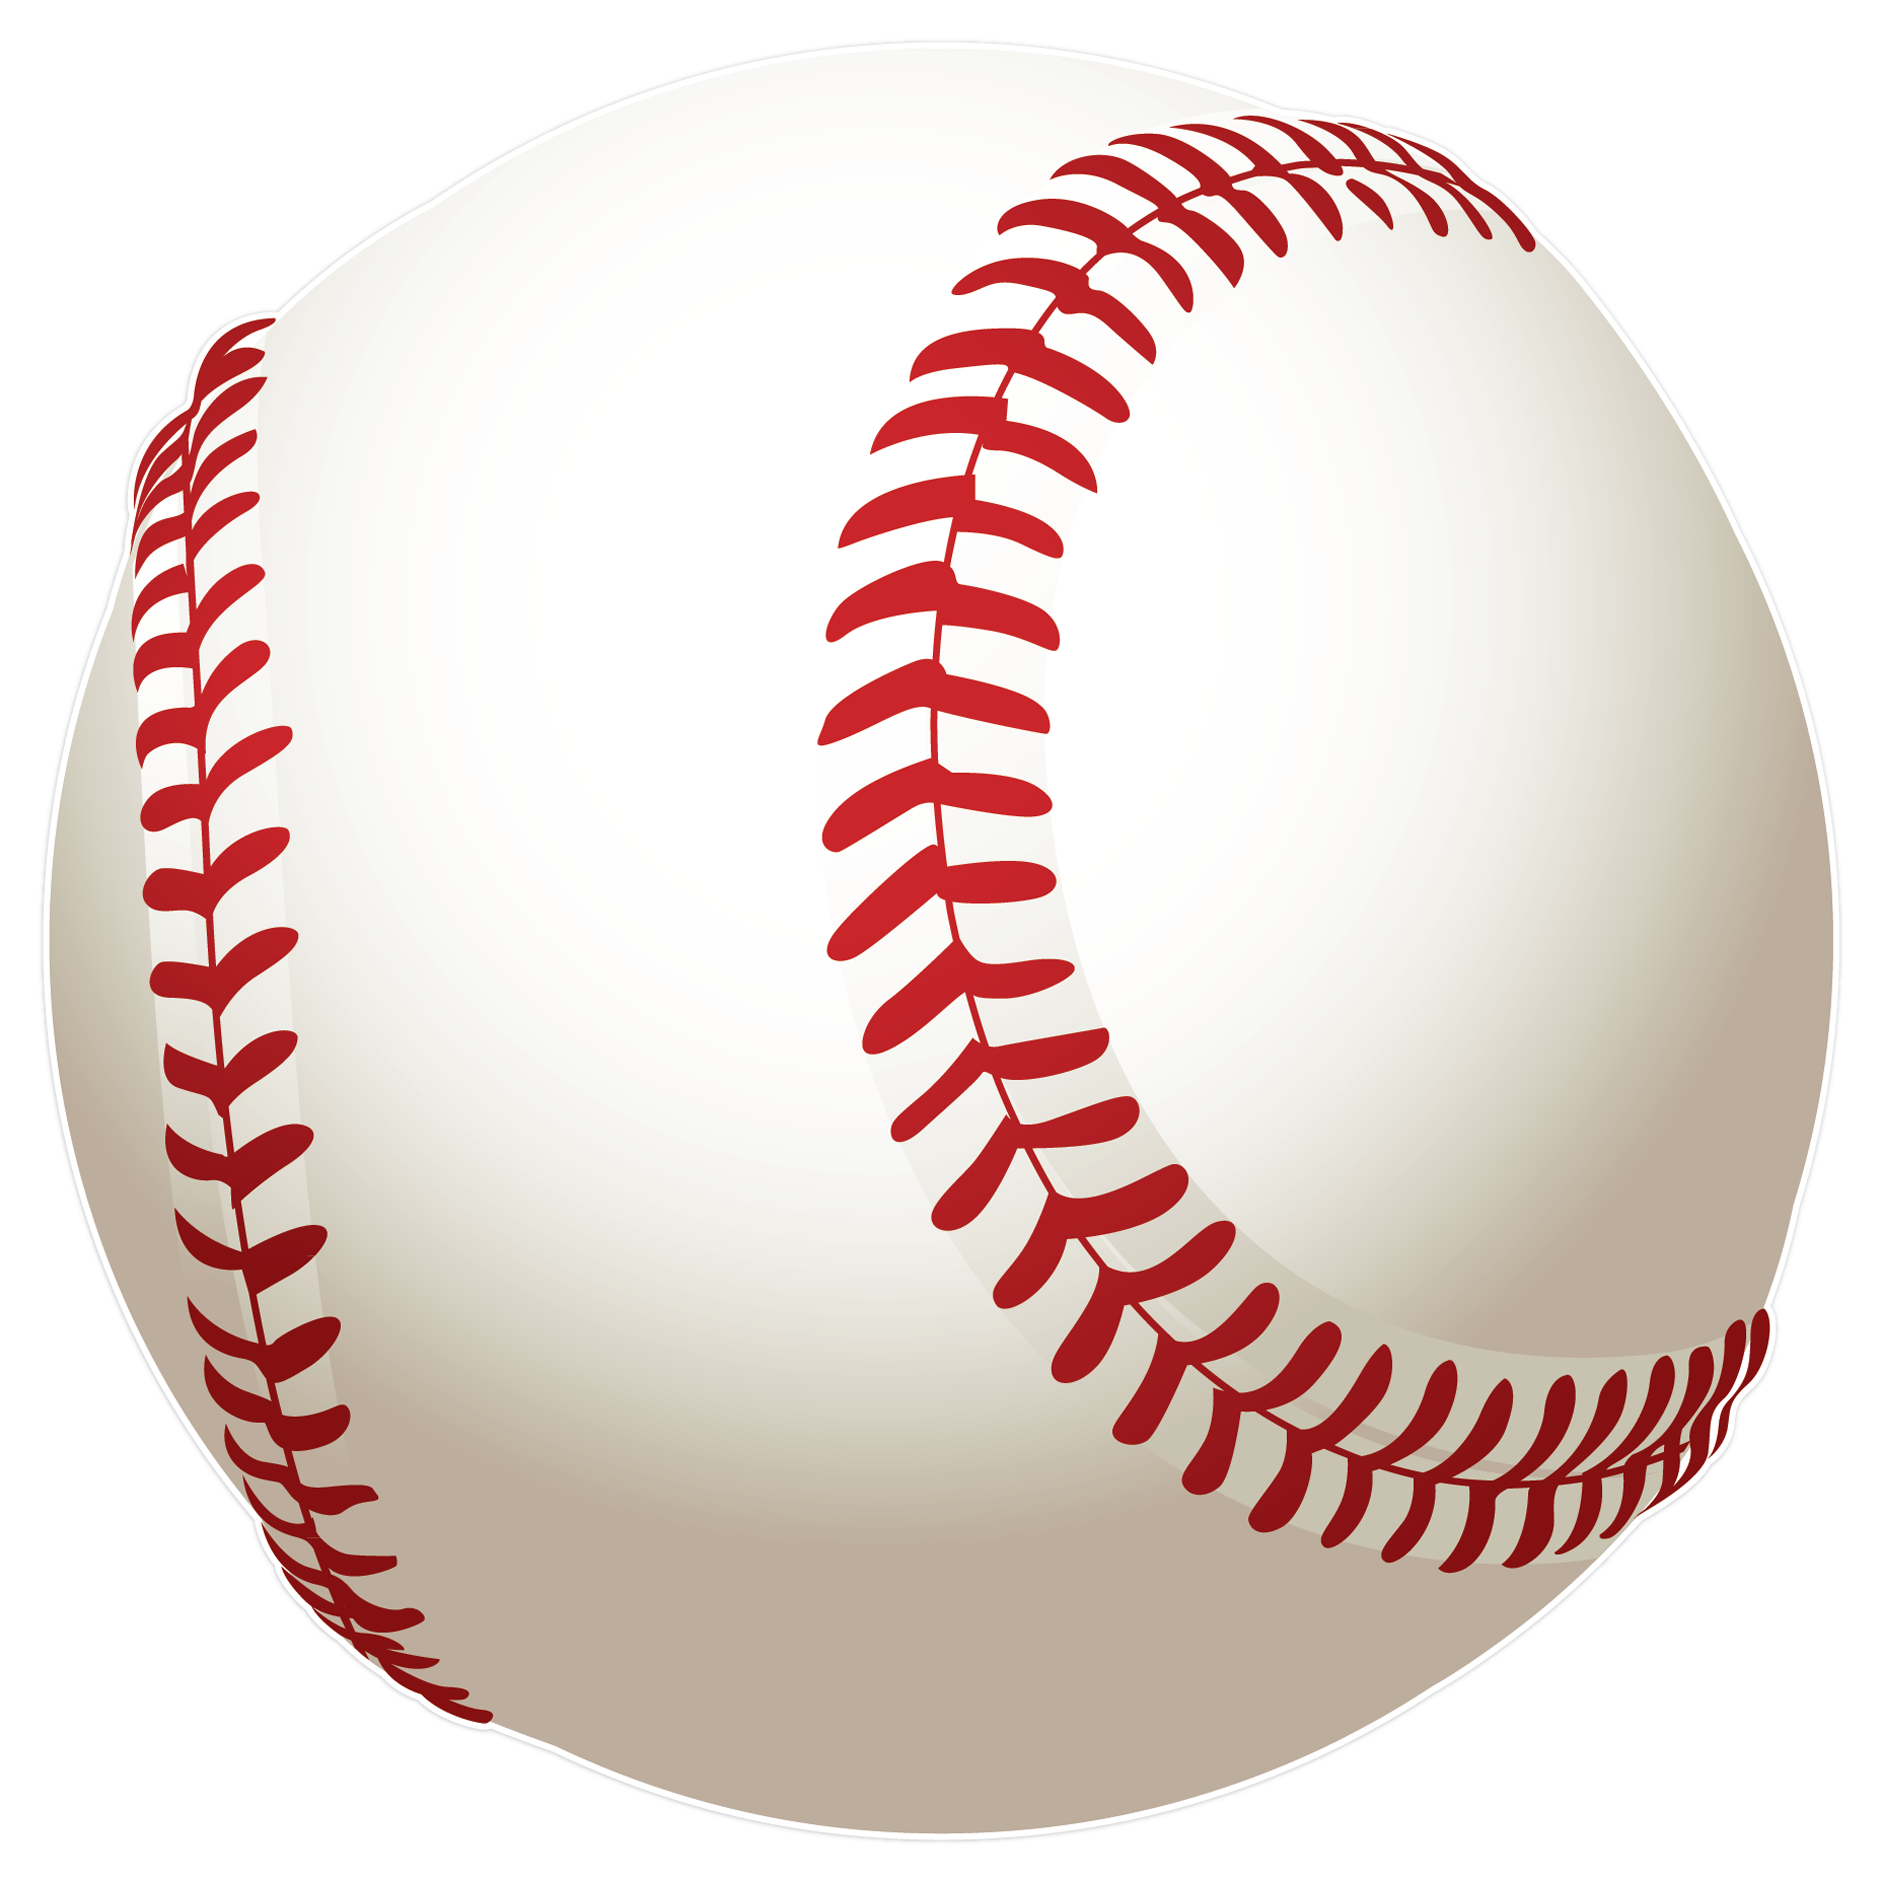 Baseball image transparent #35356 - Free Icons and PNG Backgrounds